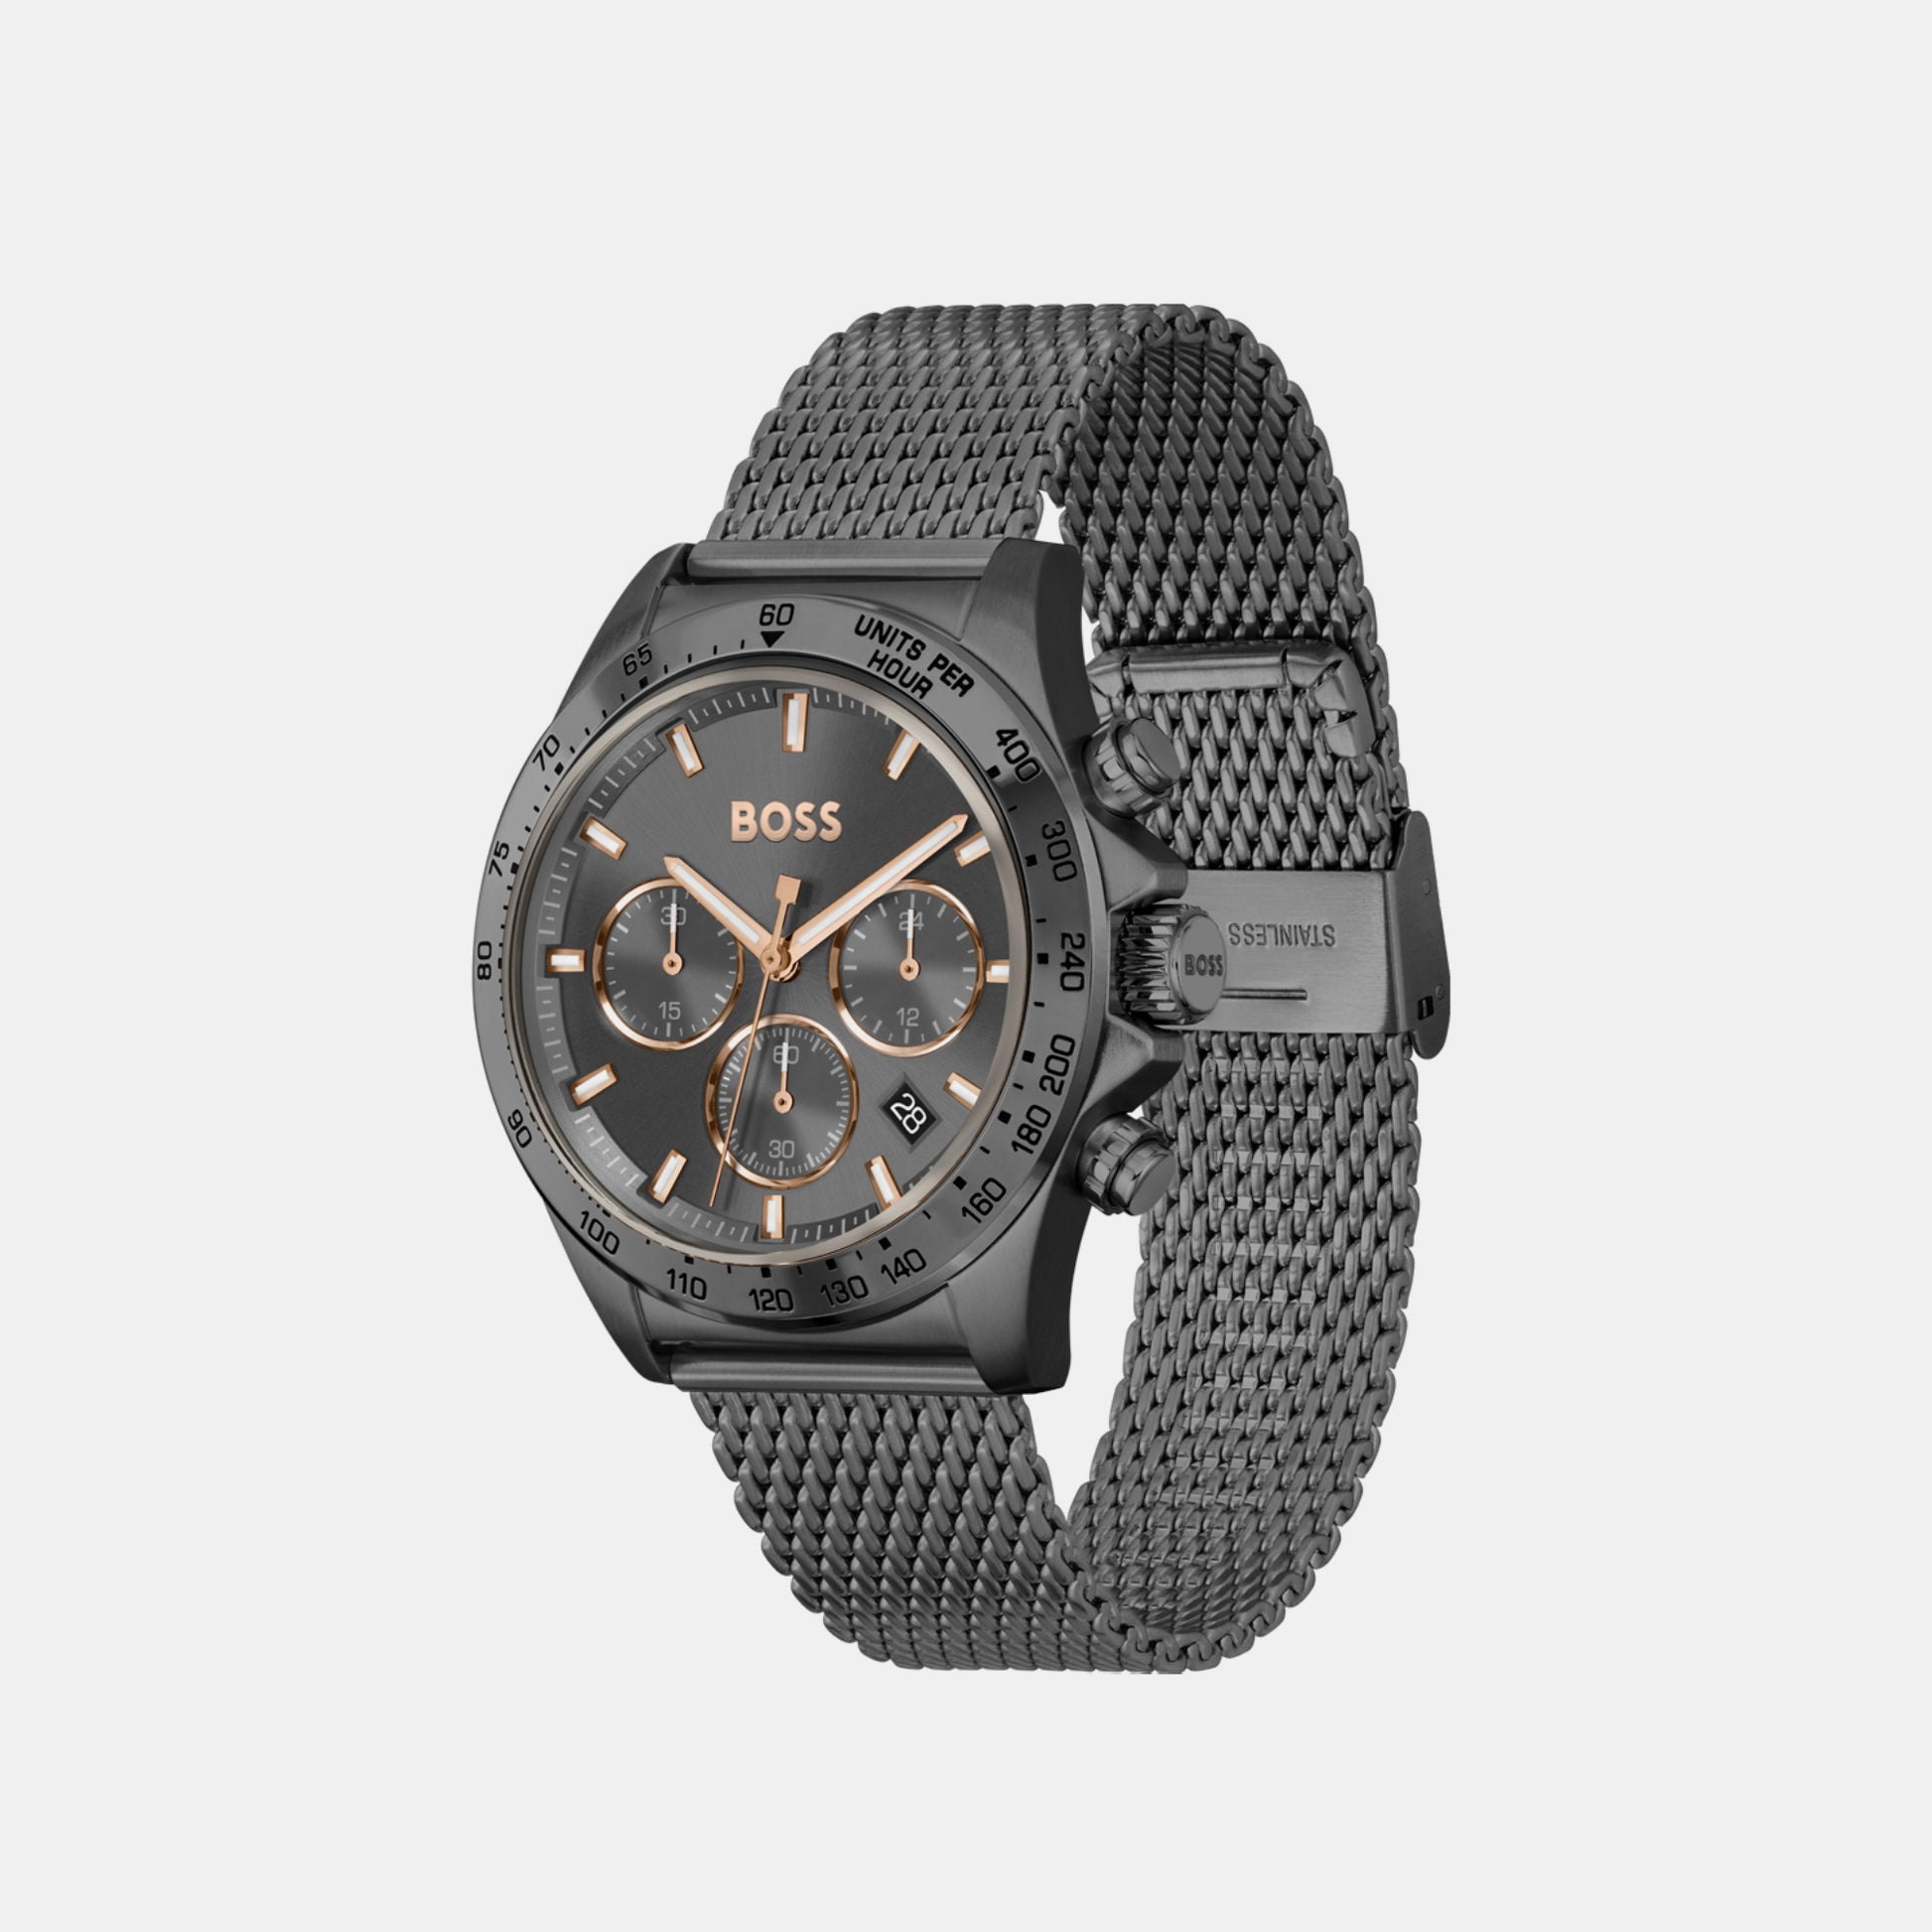 Hero Male Grey Chronograph Mesh Watch 1514021 – Just In Time